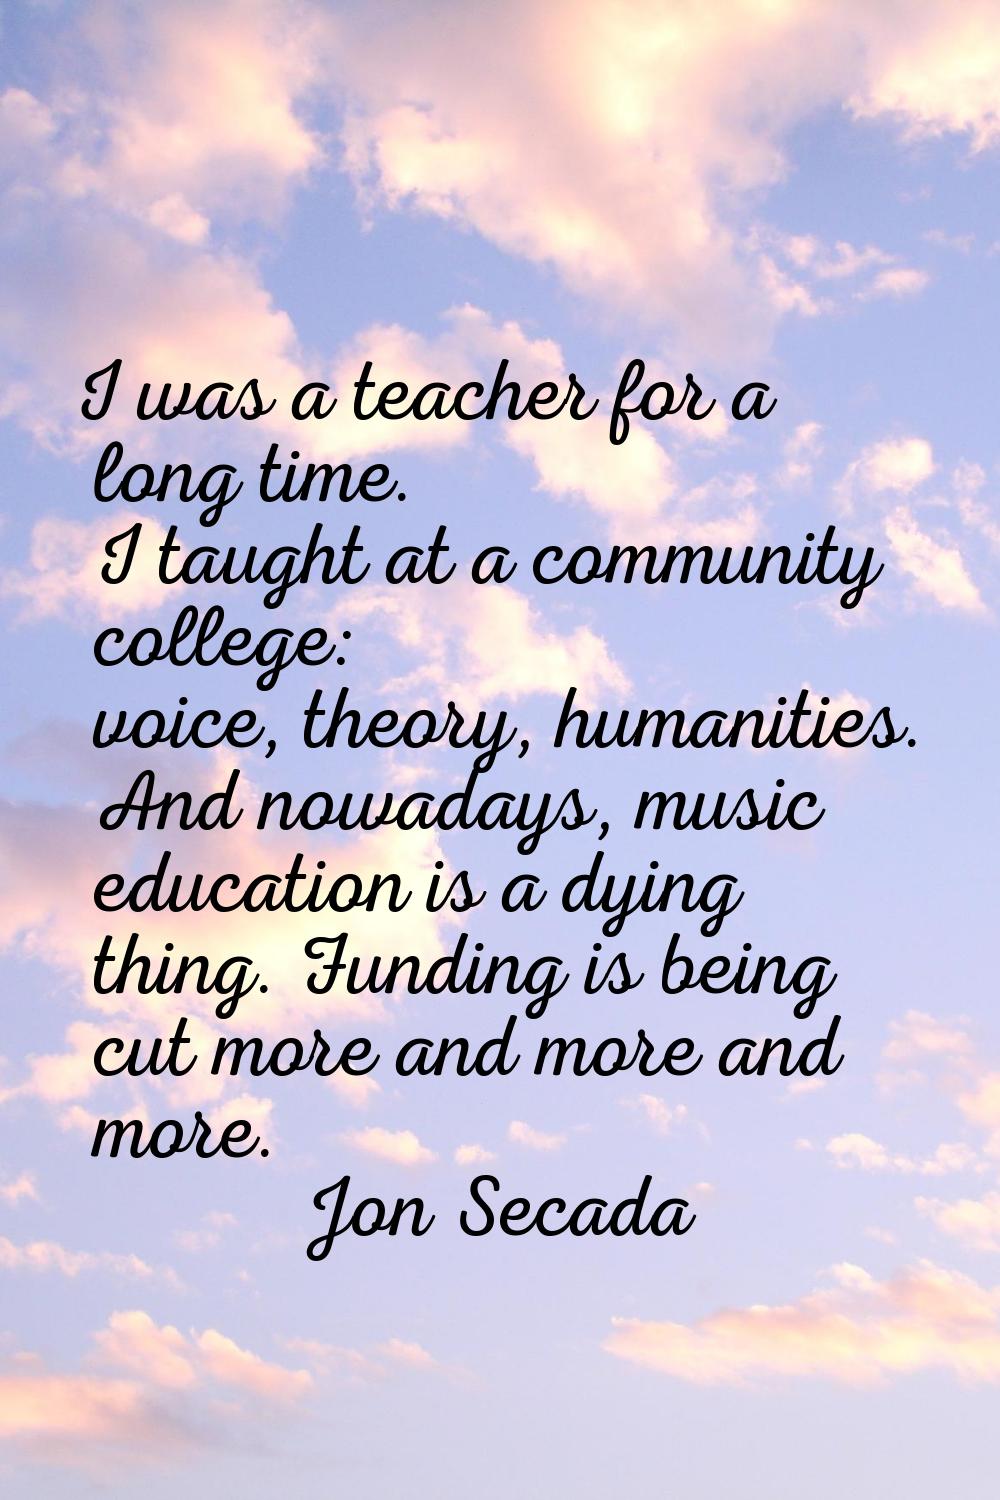 I was a teacher for a long time. I taught at a community college: voice, theory, humanities. And no